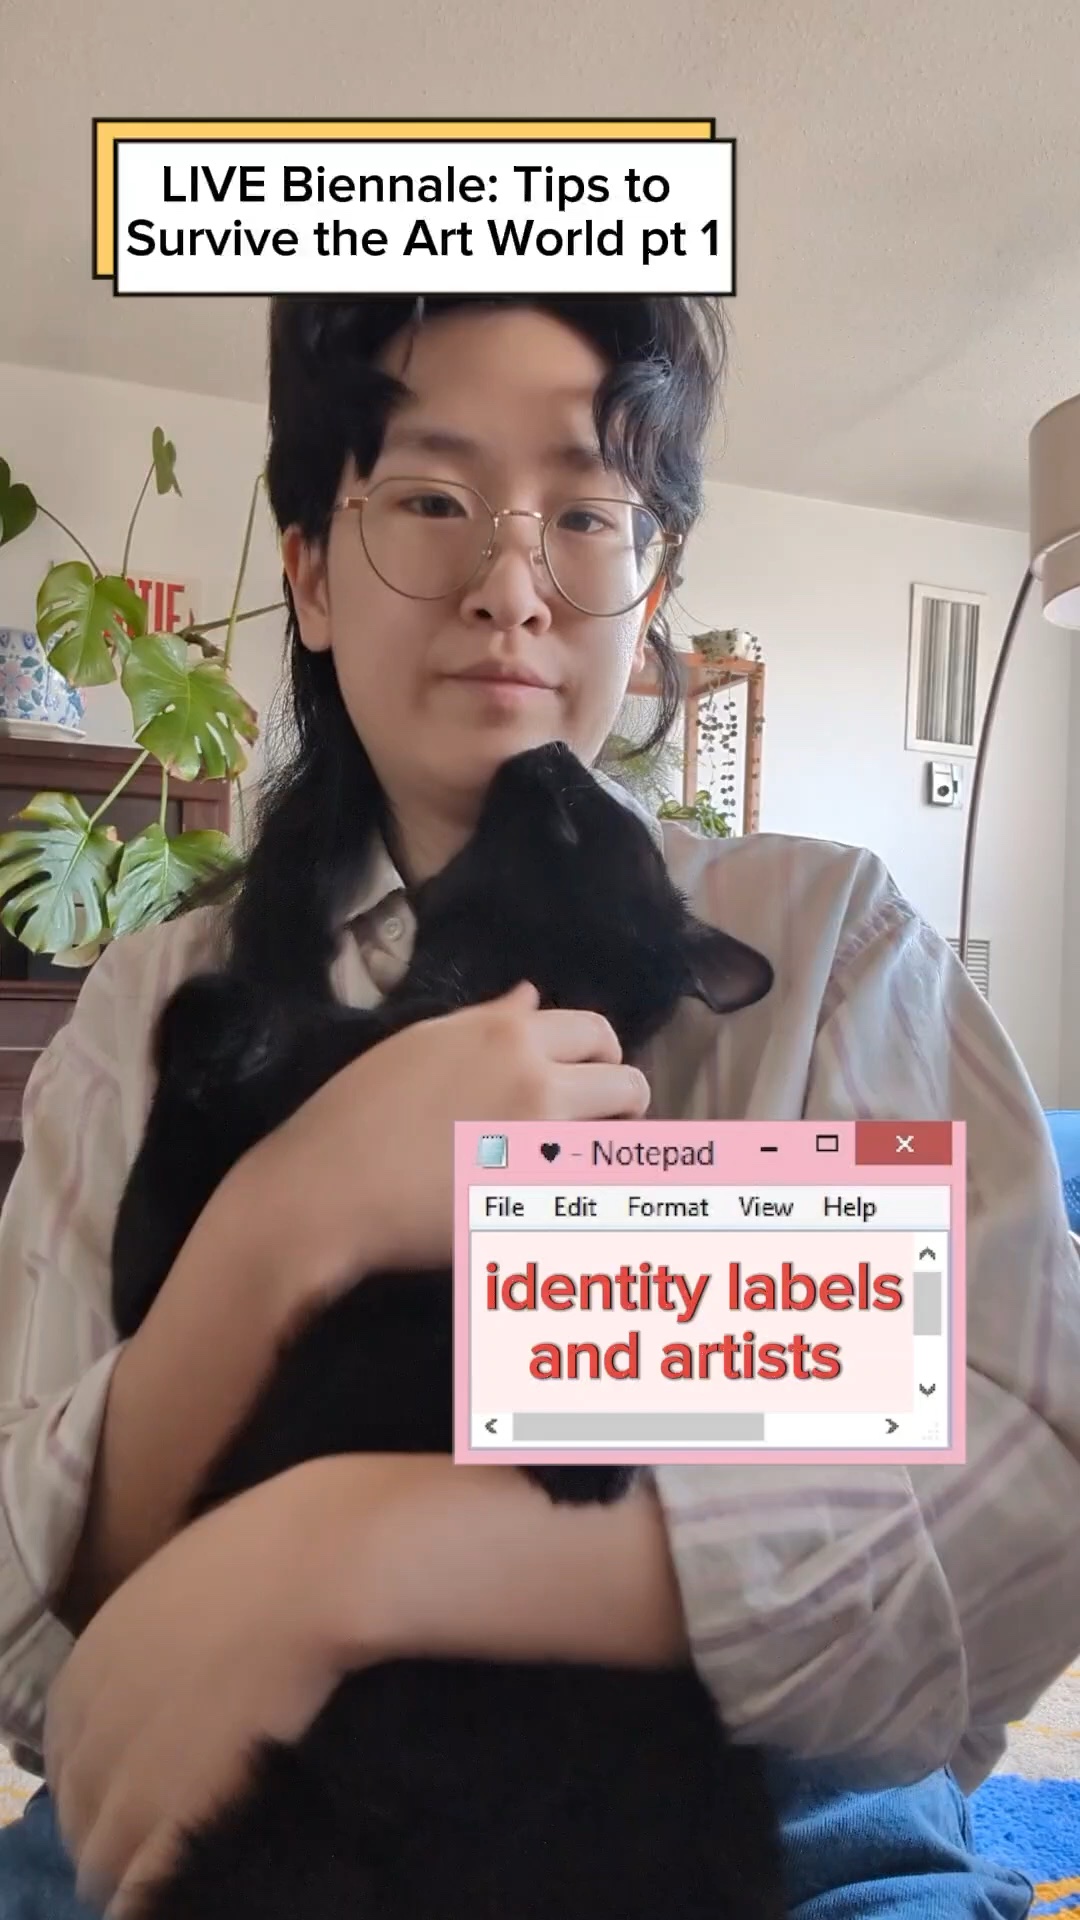 Tip#1: Identity Labels